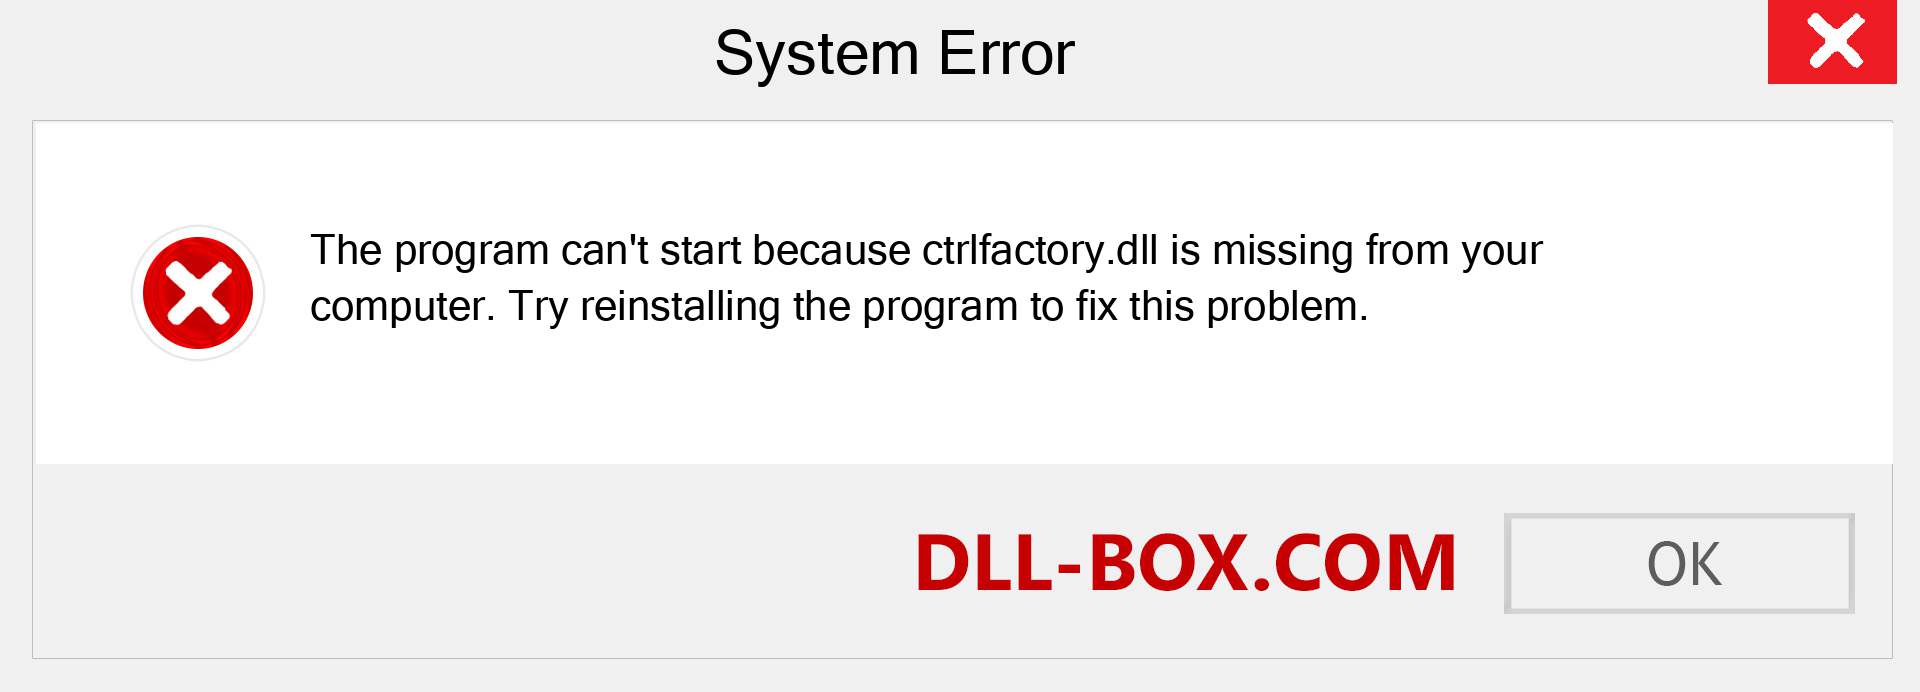  ctrlfactory.dll file is missing?. Download for Windows 7, 8, 10 - Fix  ctrlfactory dll Missing Error on Windows, photos, images